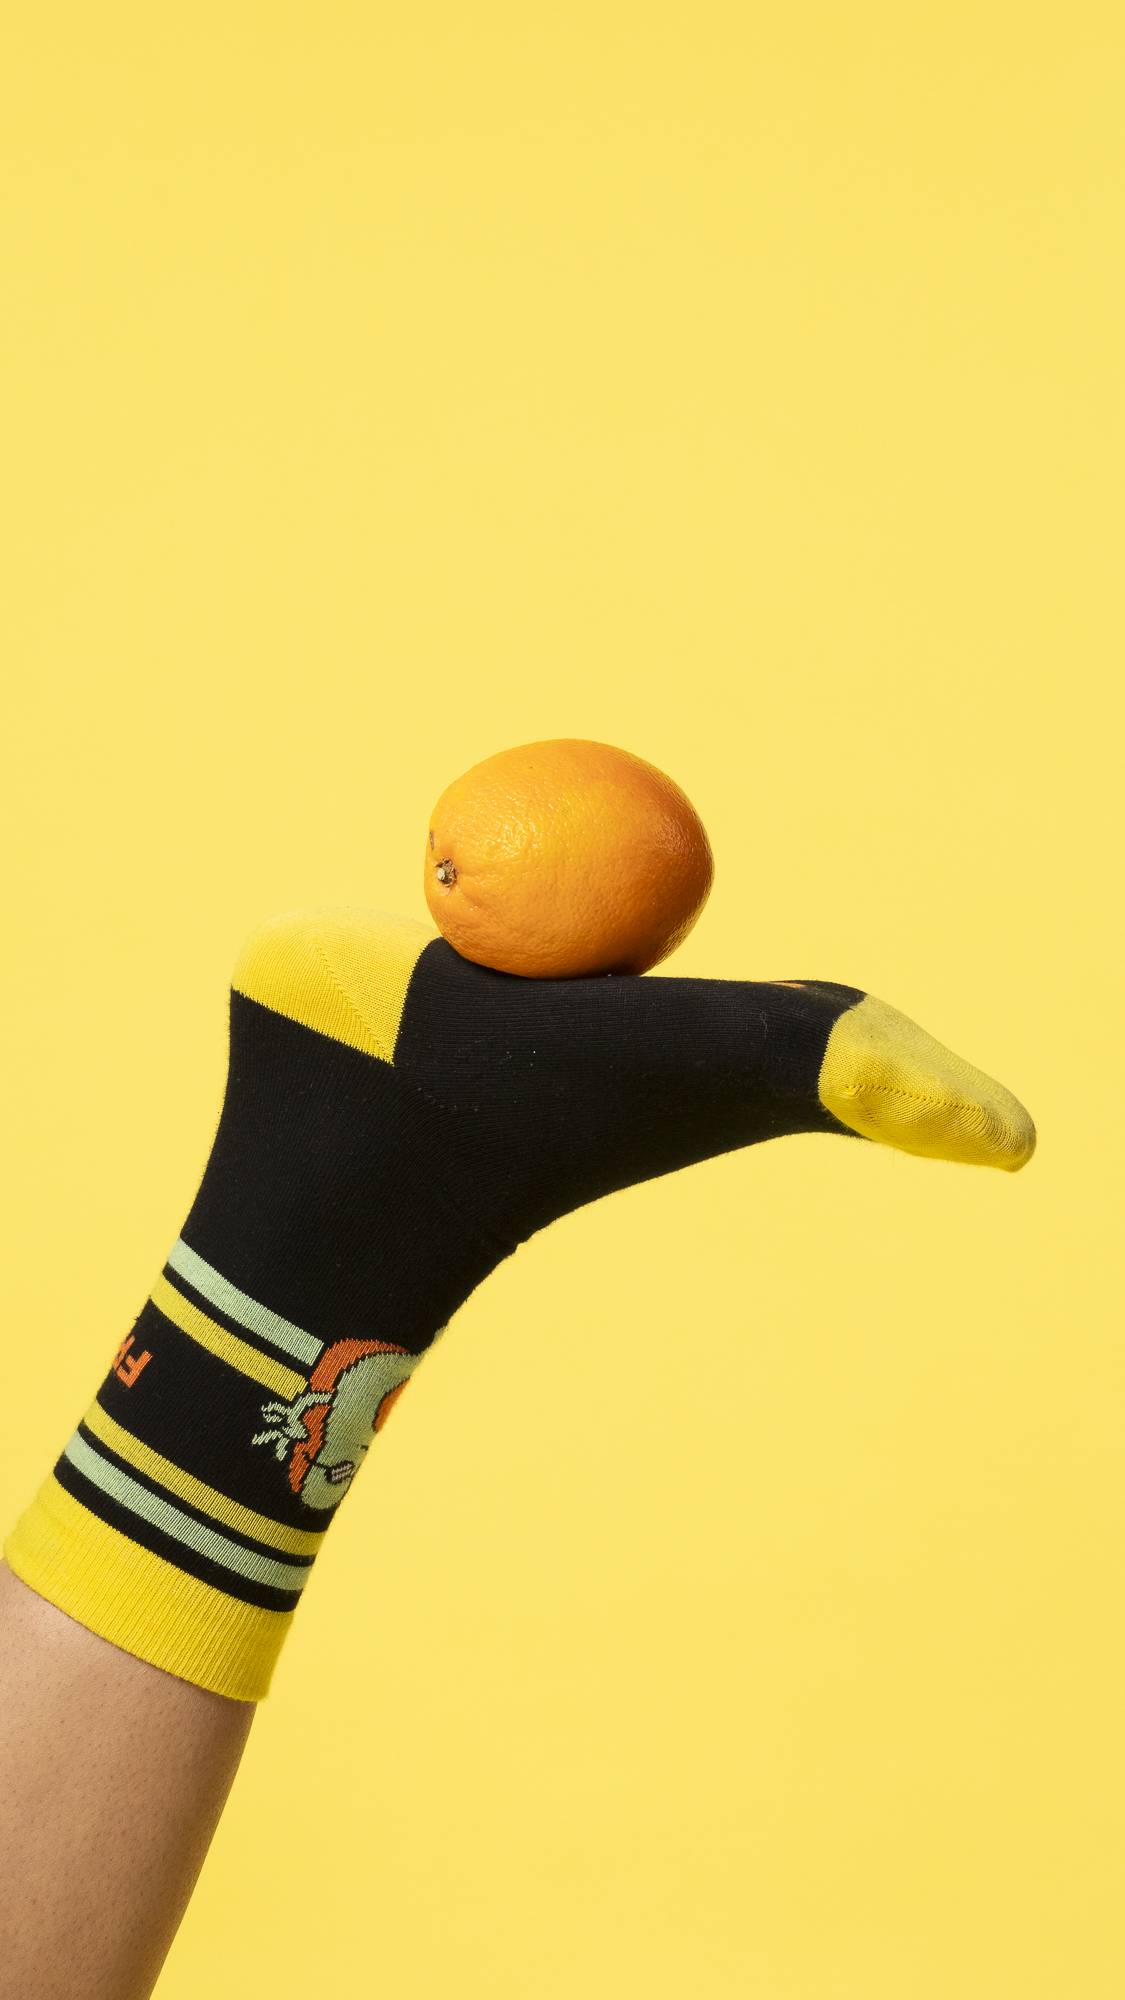 A single foot wearing the Fresh Values sock is stuck in the air balancing an orange on a bright yellow background.